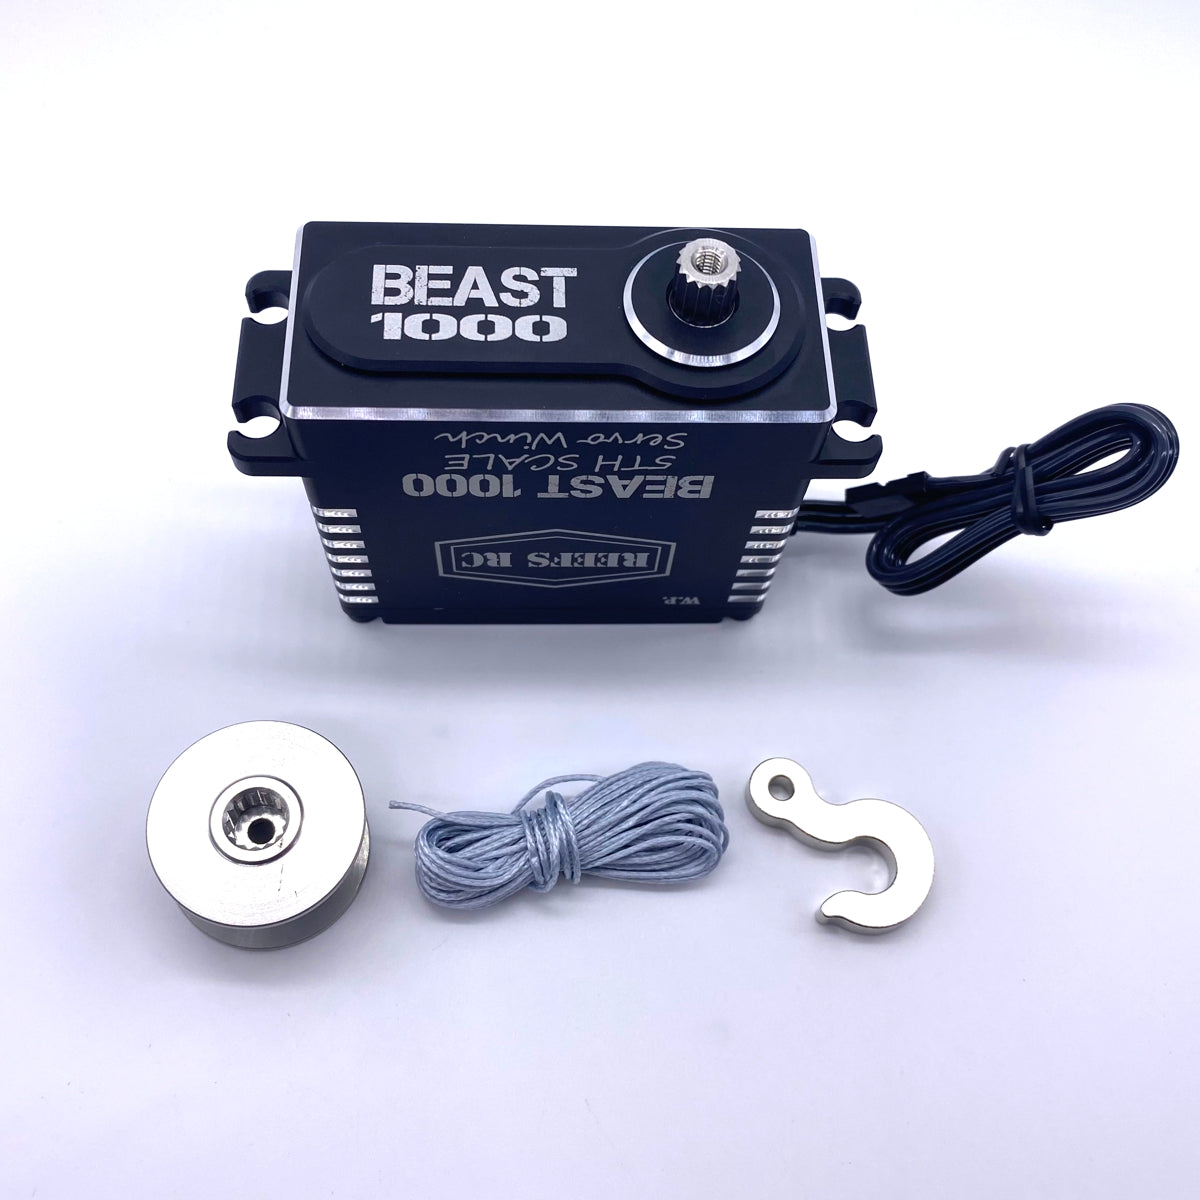 Beast 1000 1/5th Scale Servo Winch w/Spool, Hook & Syn Line - Dirt Cheap RC SAVING YOU MONEY, ONE PART AT A TIME